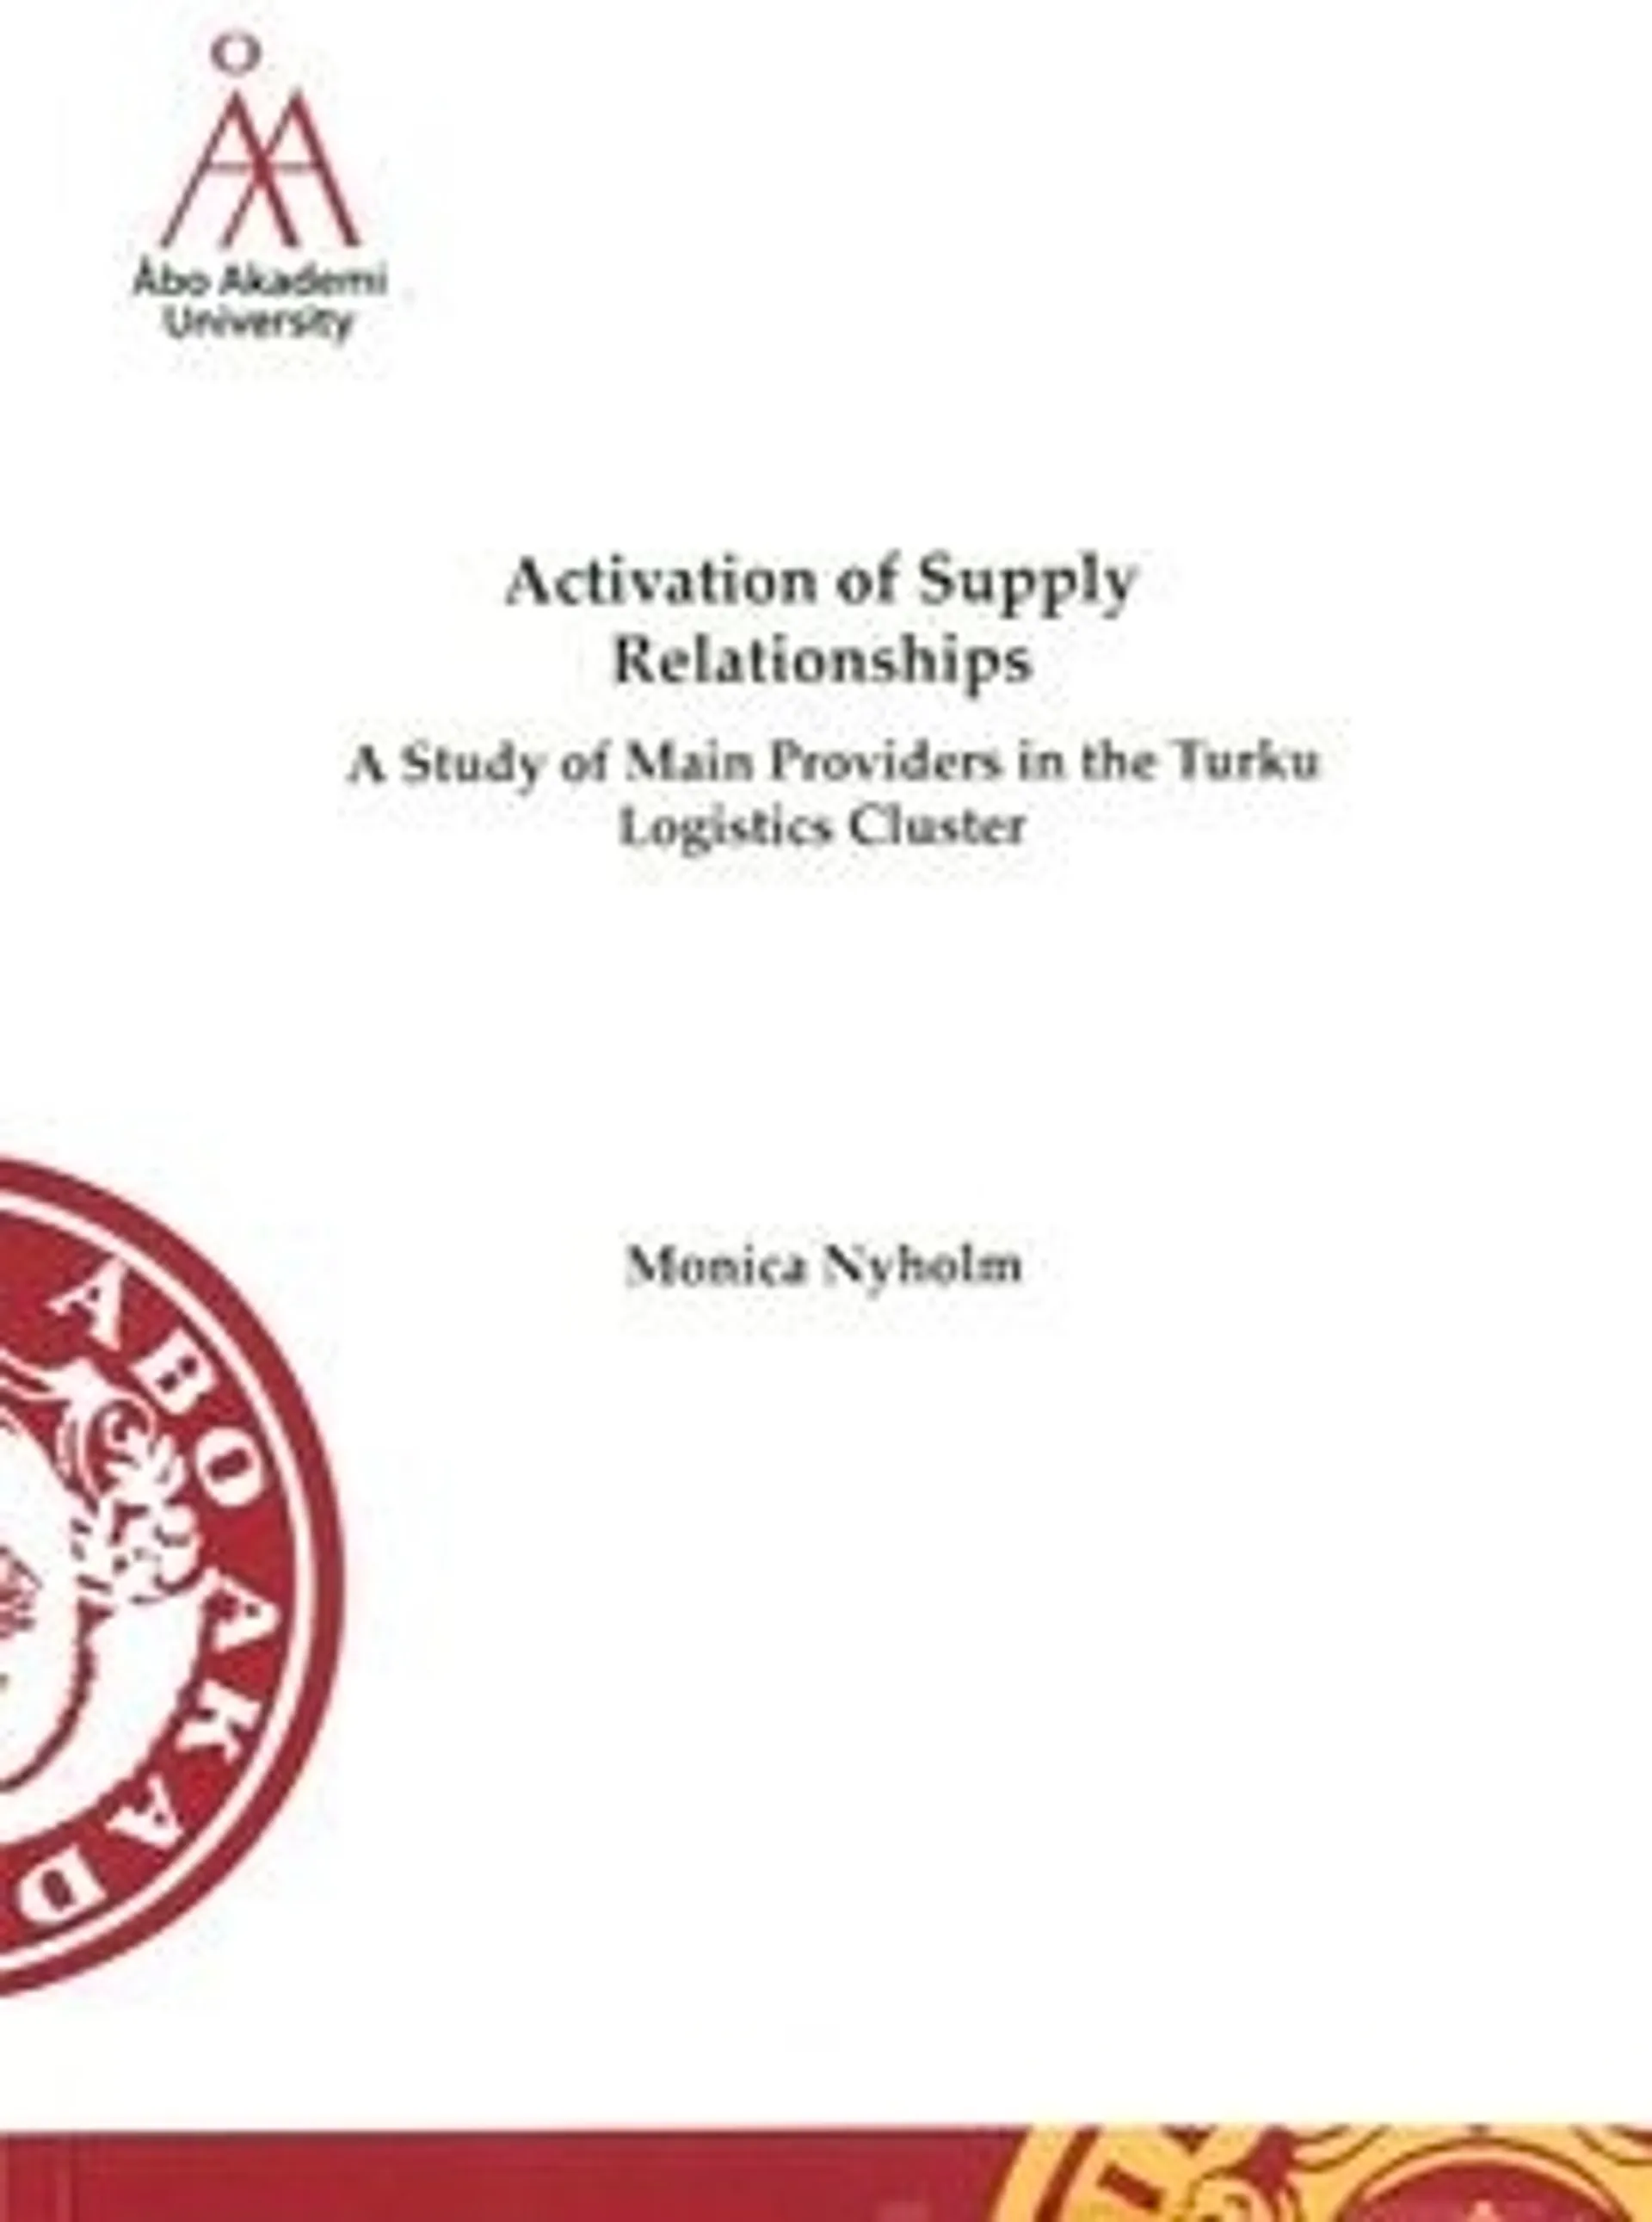 Nyholm, Activation of Supply Relationships